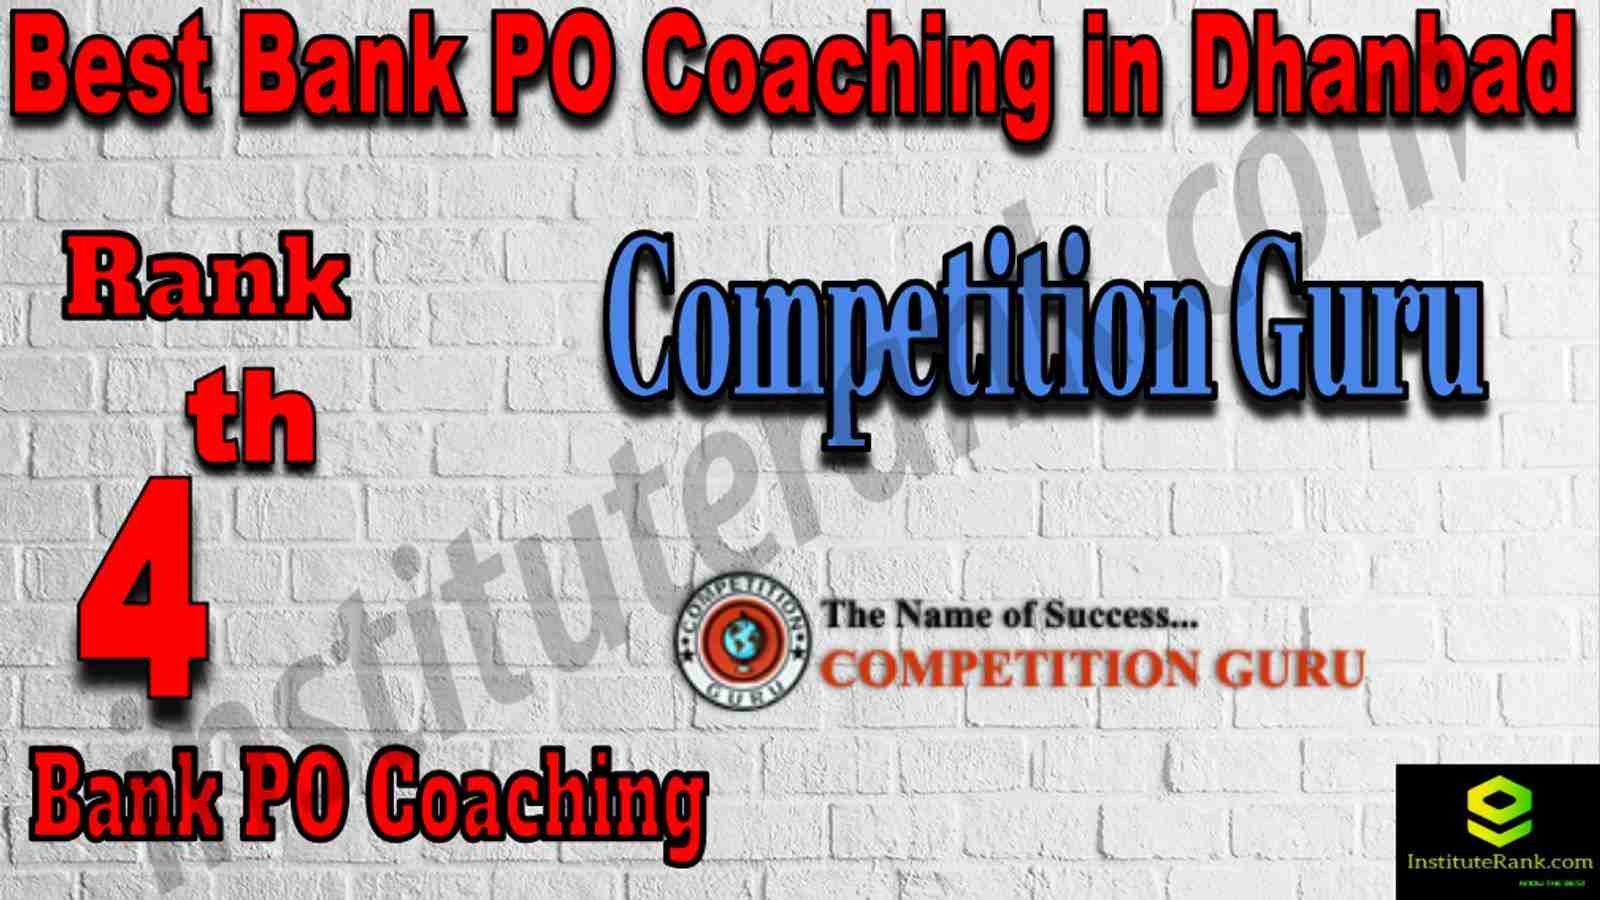 4th Best Bank PO Coaching in Dhanbad